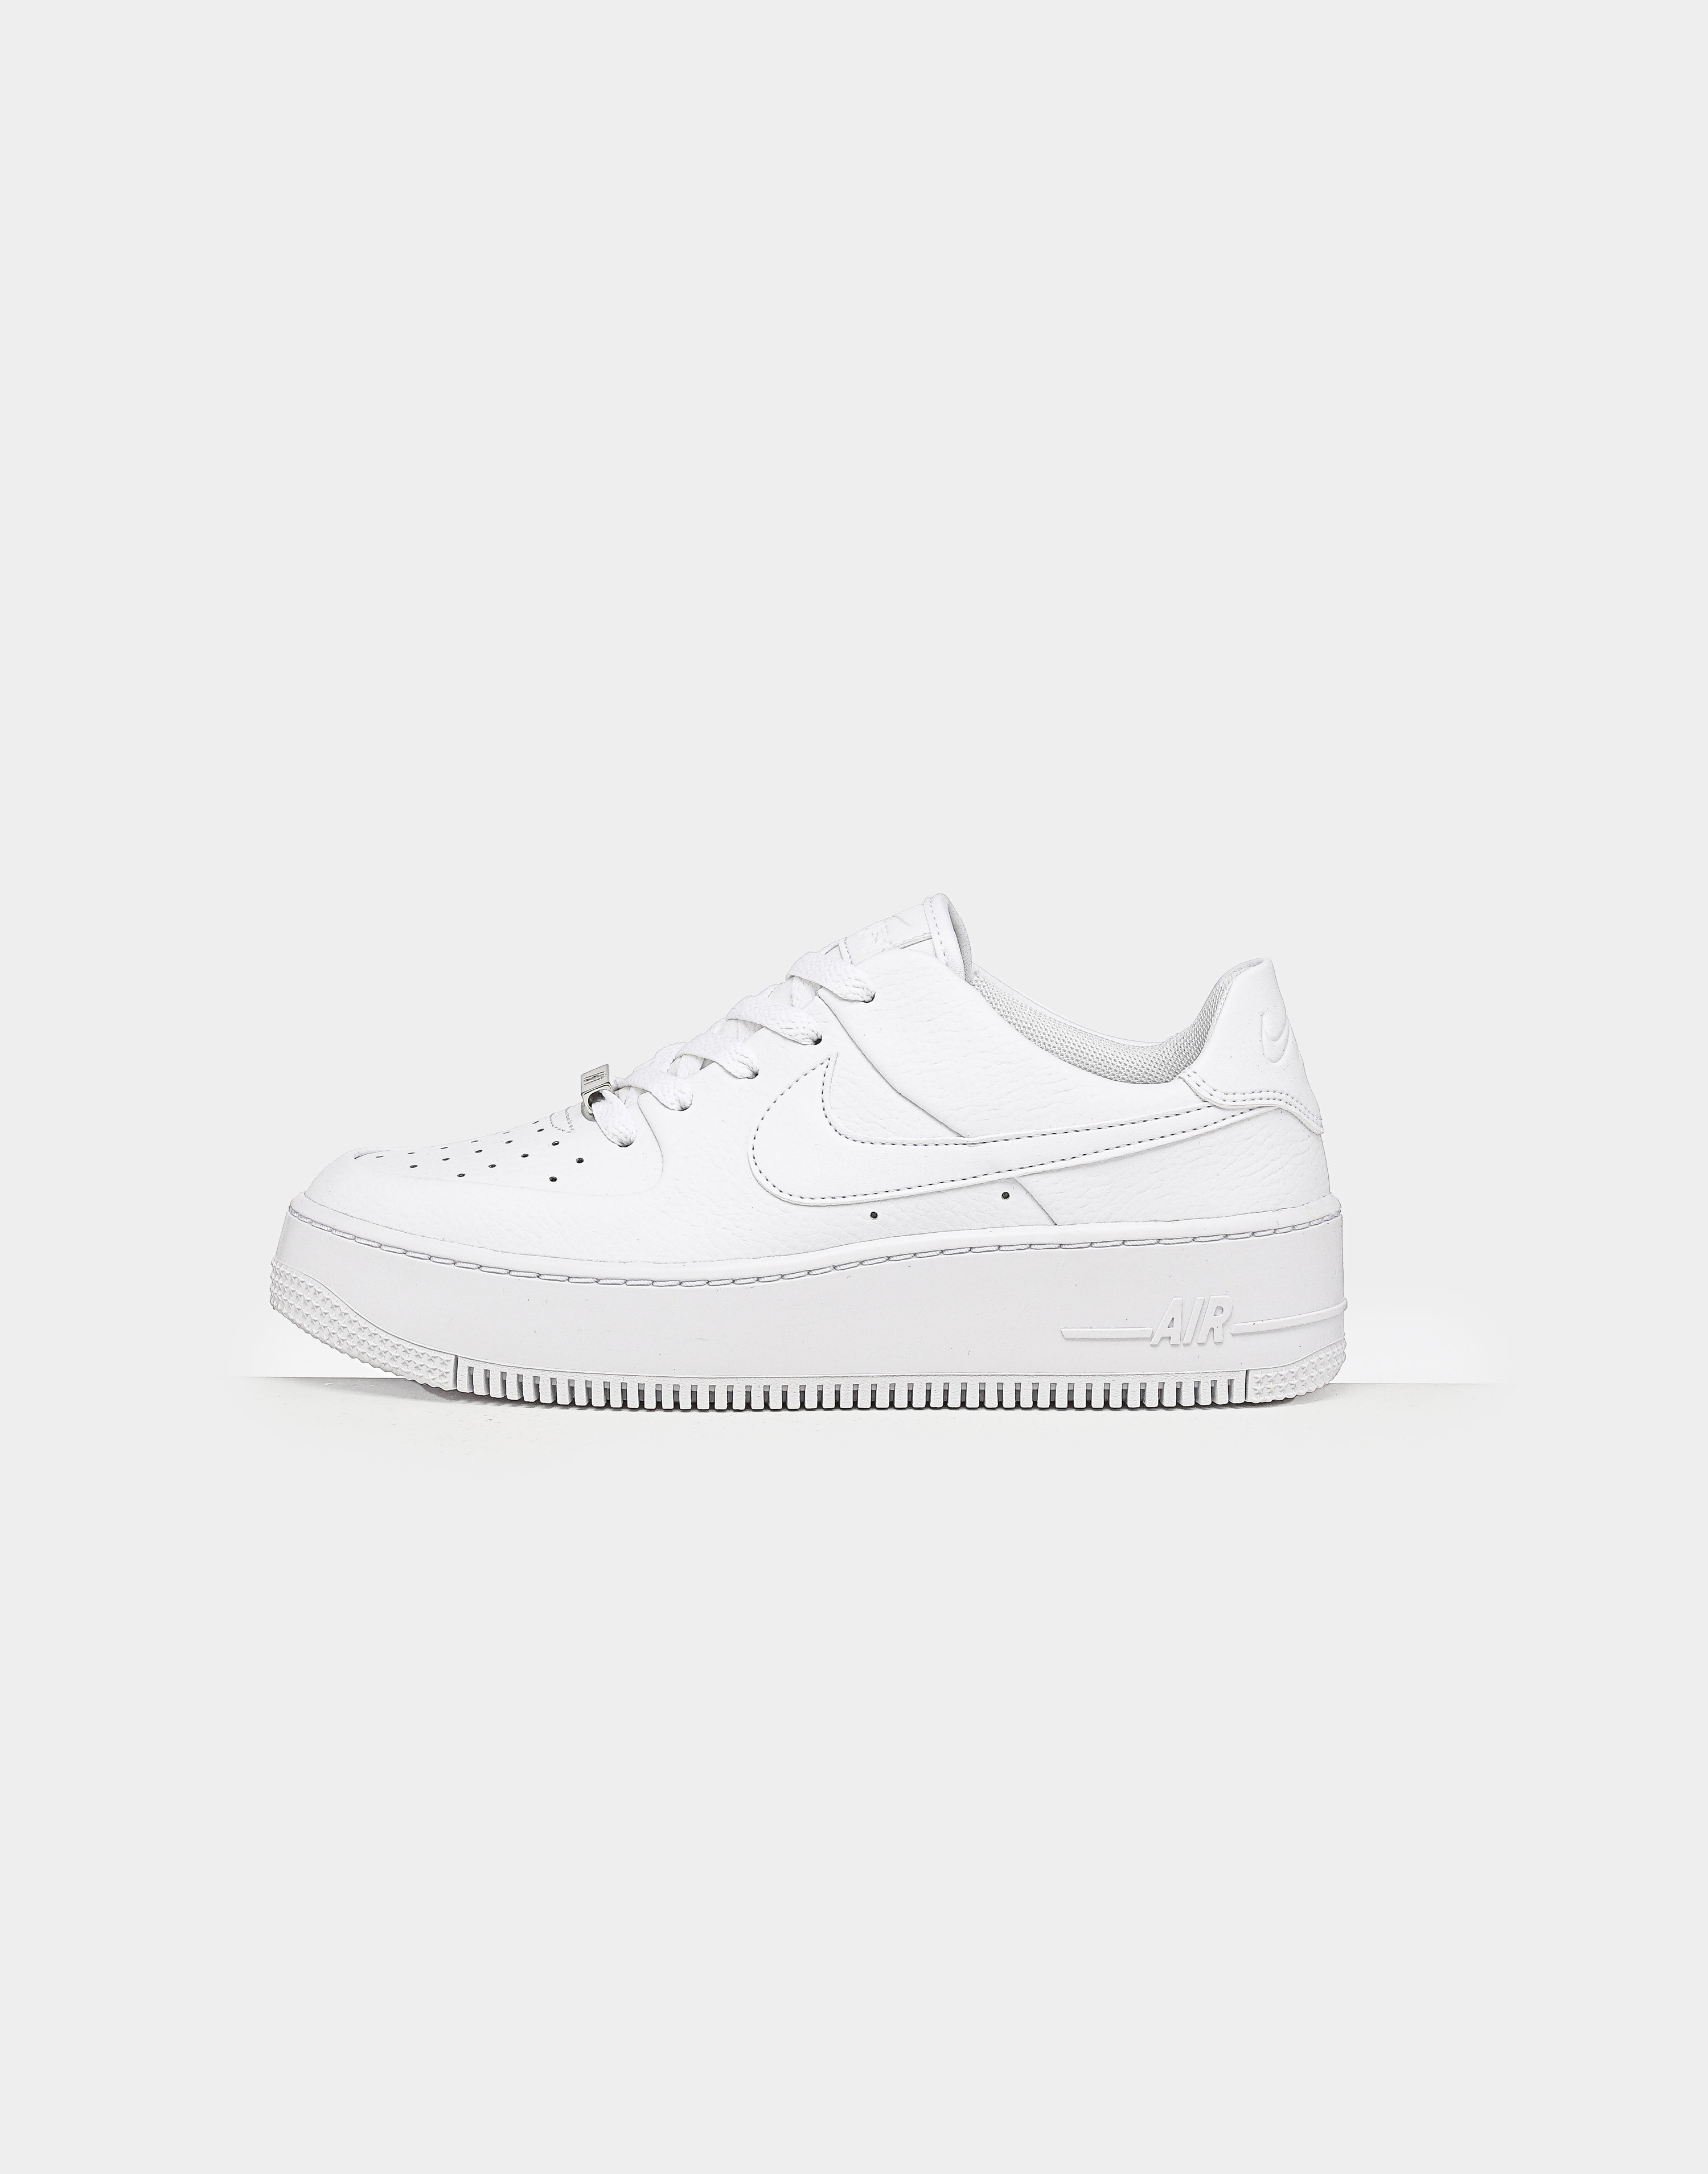 air force ones womens size 8